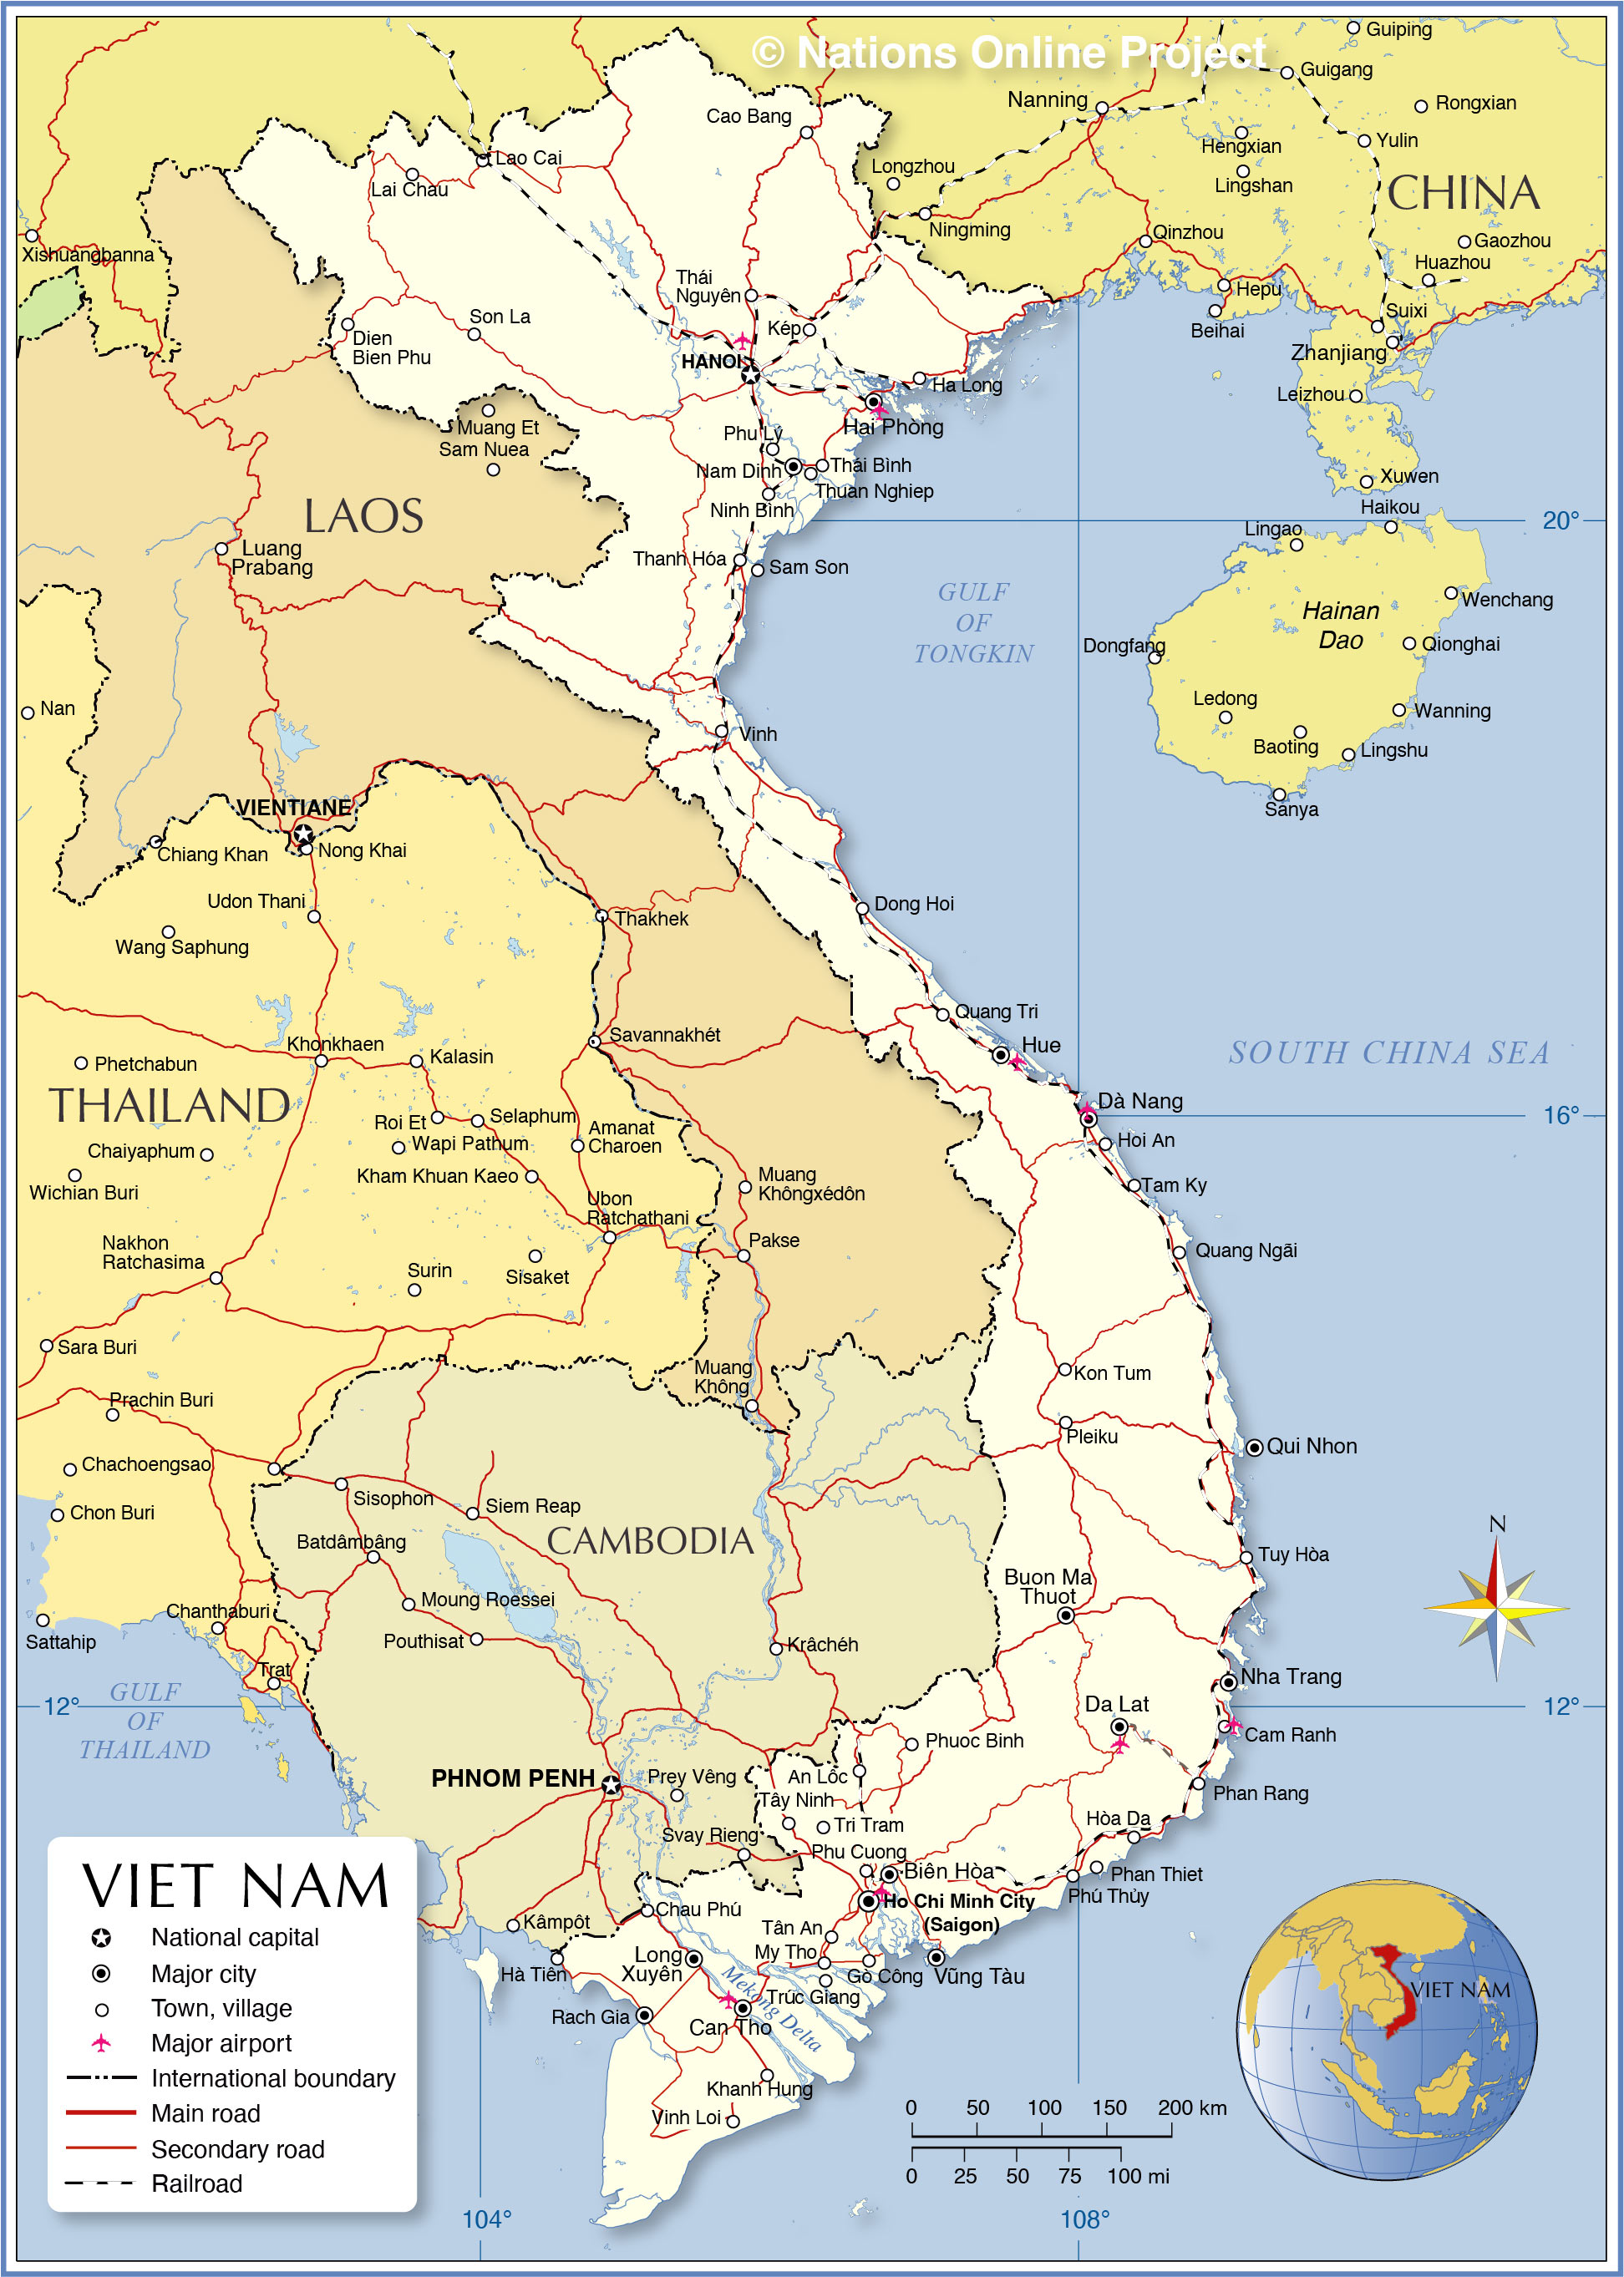 north and south vietnam border map Political Map Of Vietnam Nations Online Project north and south vietnam border map